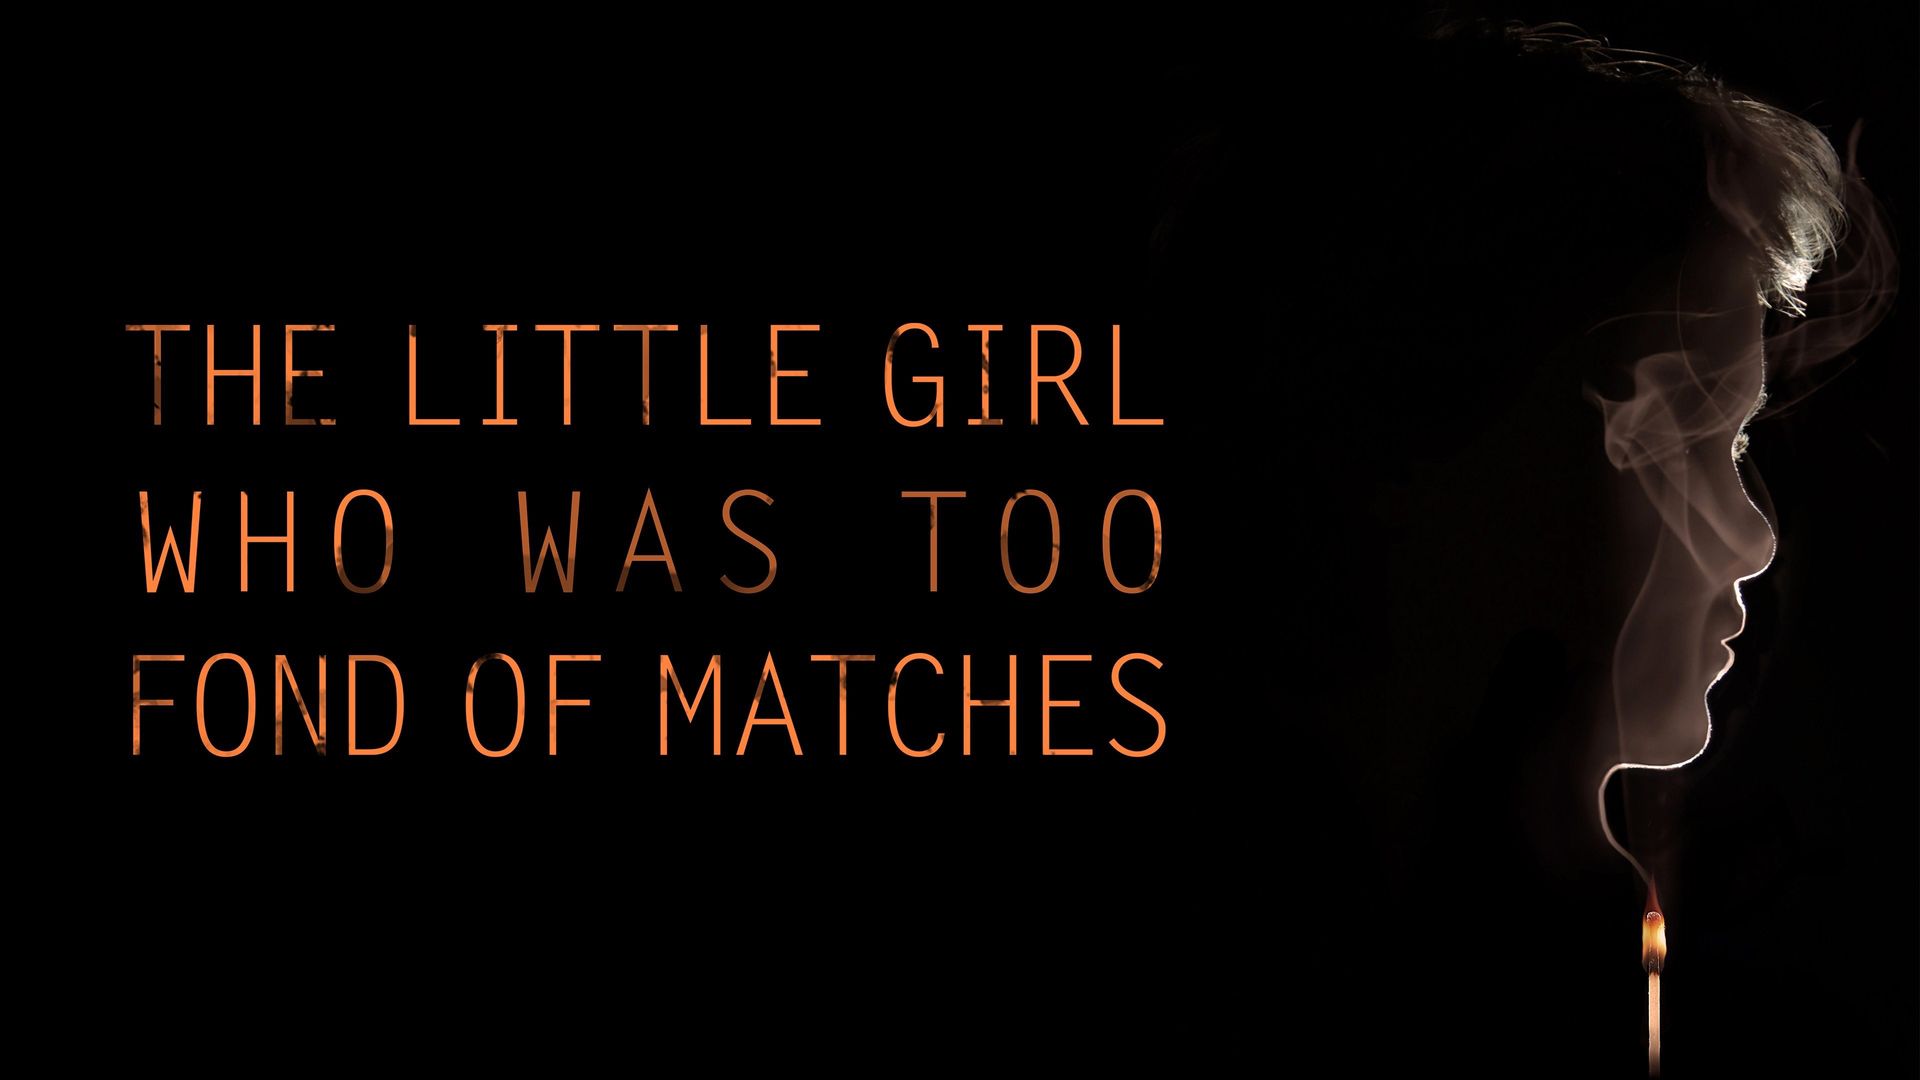 The Little Girl Who Was Too Fond of Matches Backdrop